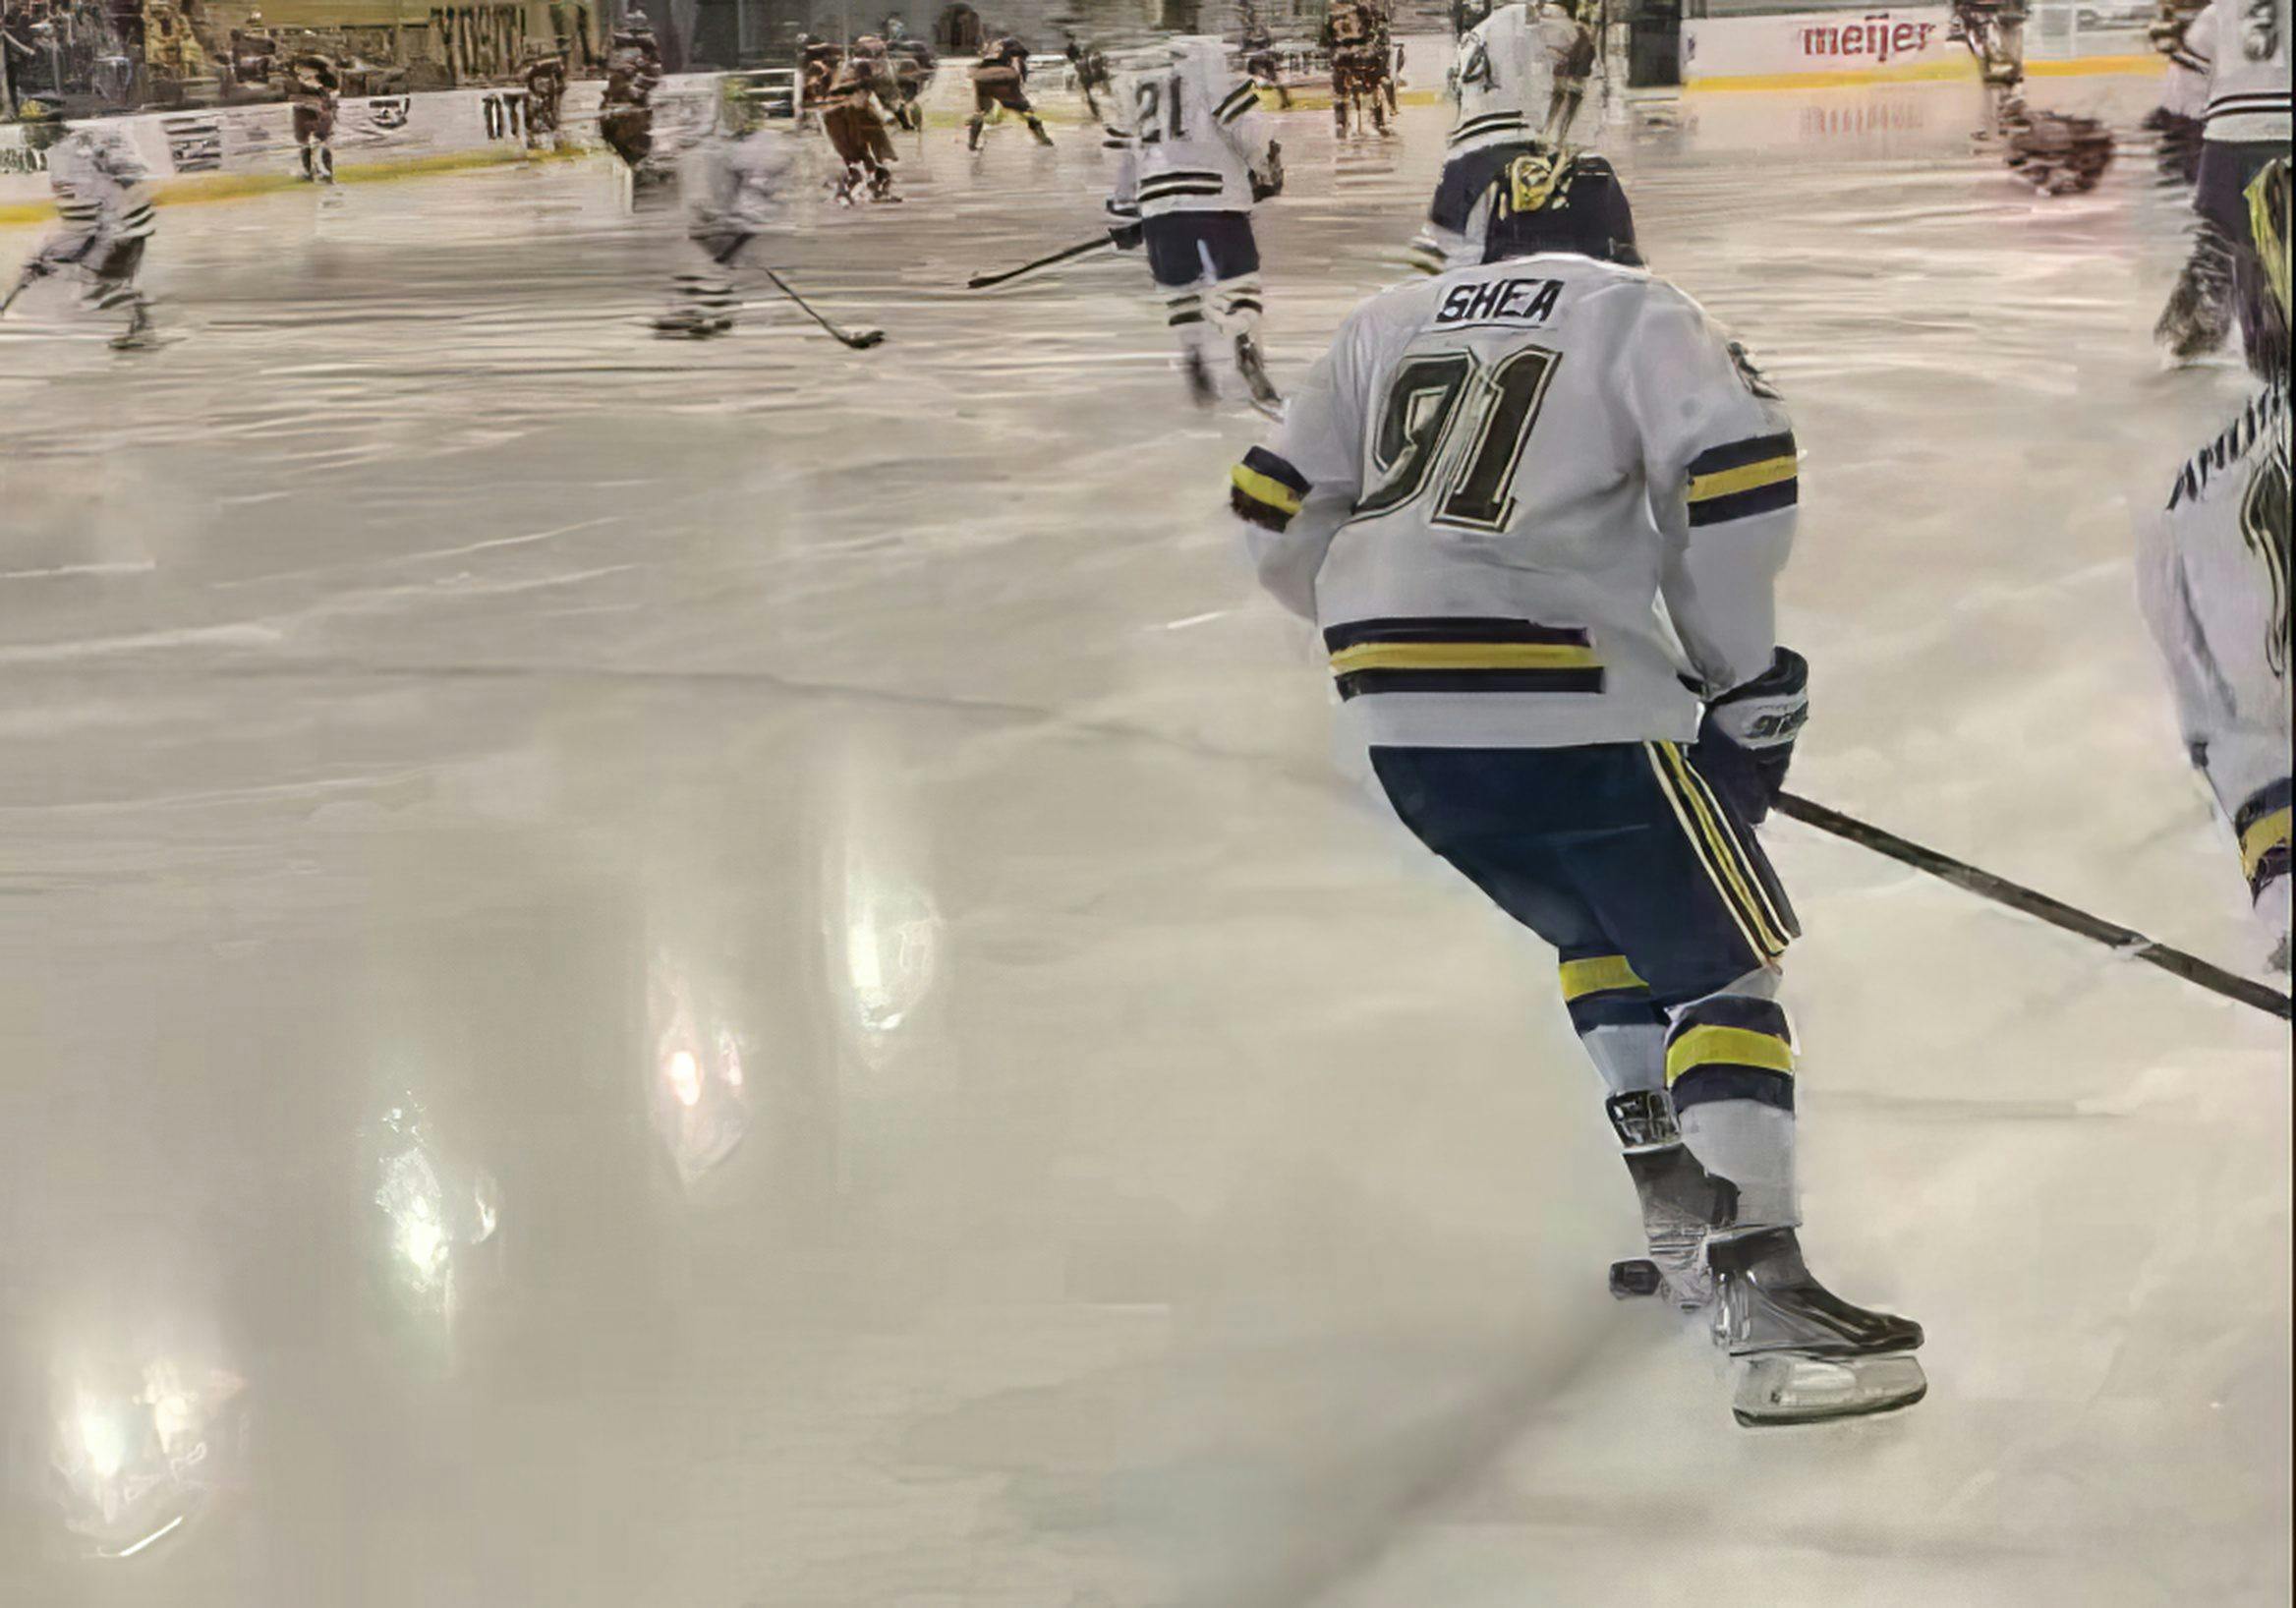 With a depleted lineup, University of Michigan uses goalie as a forward